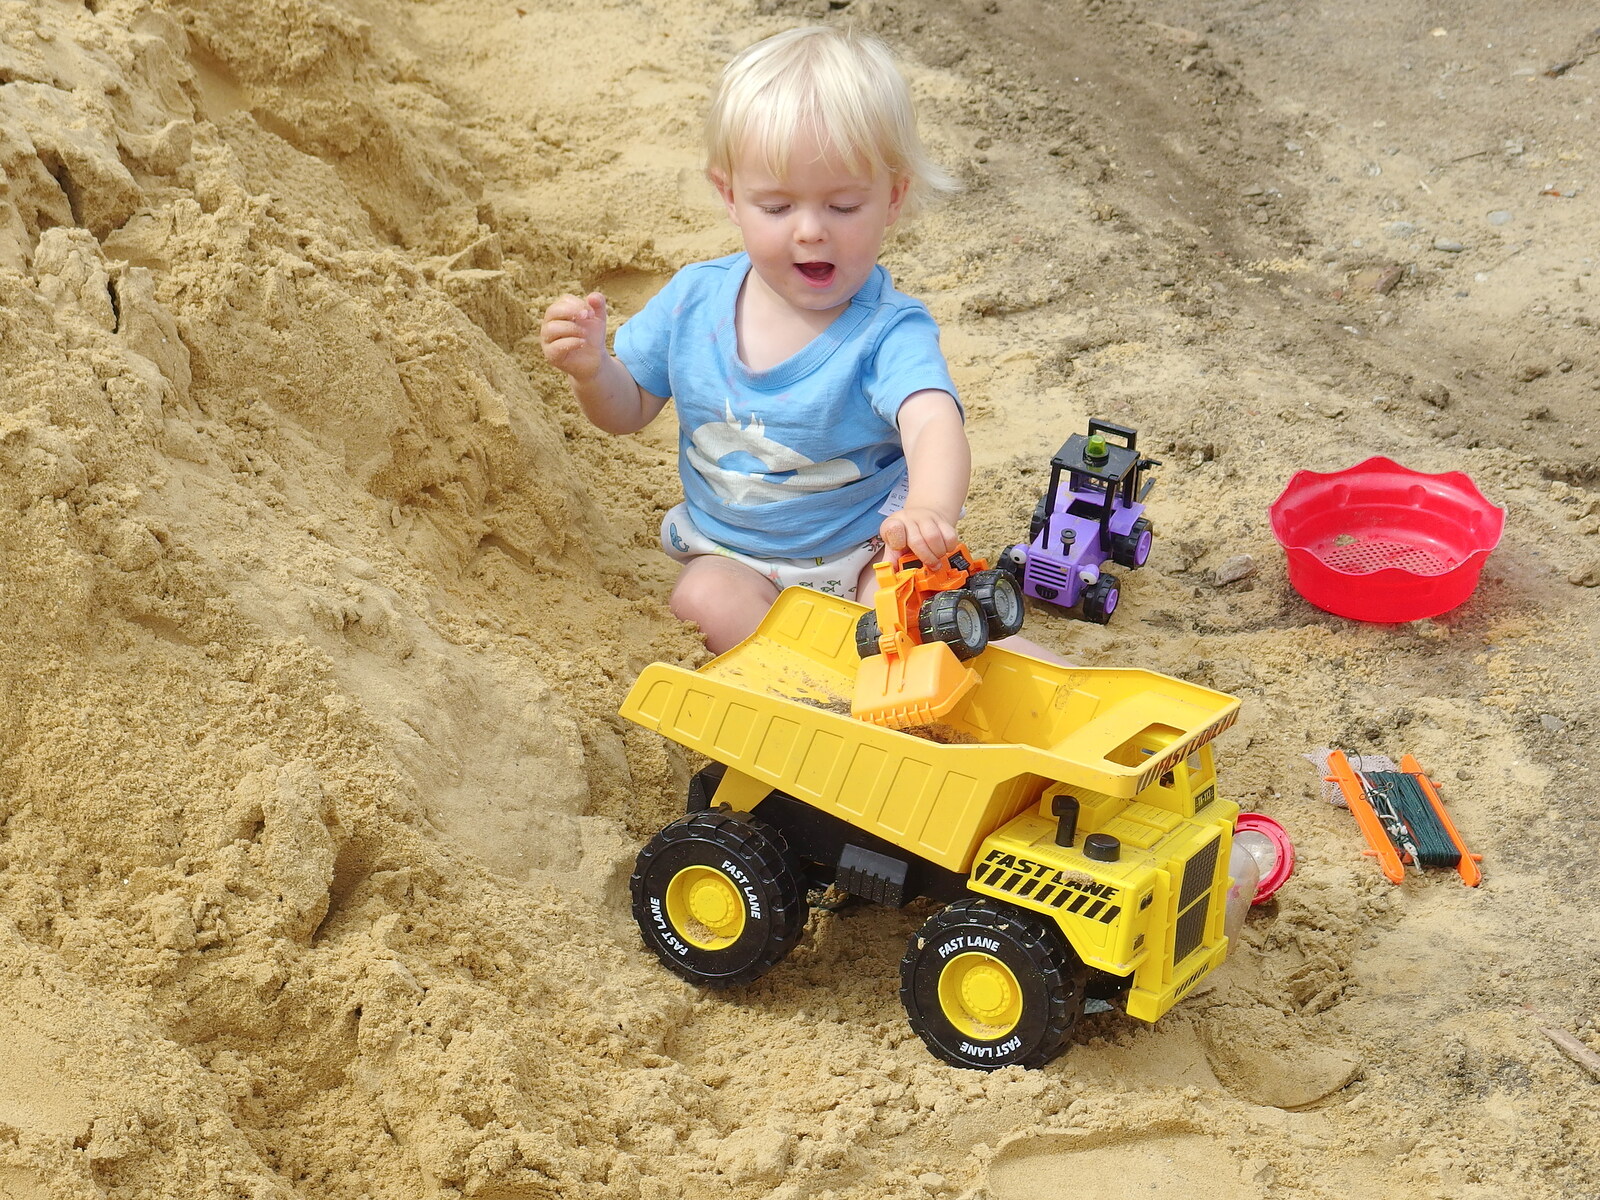 Harry fills a dumper truck up from A Giant Sand Pile, and a Walk at Thornham, Suffolk - 17th August 2013